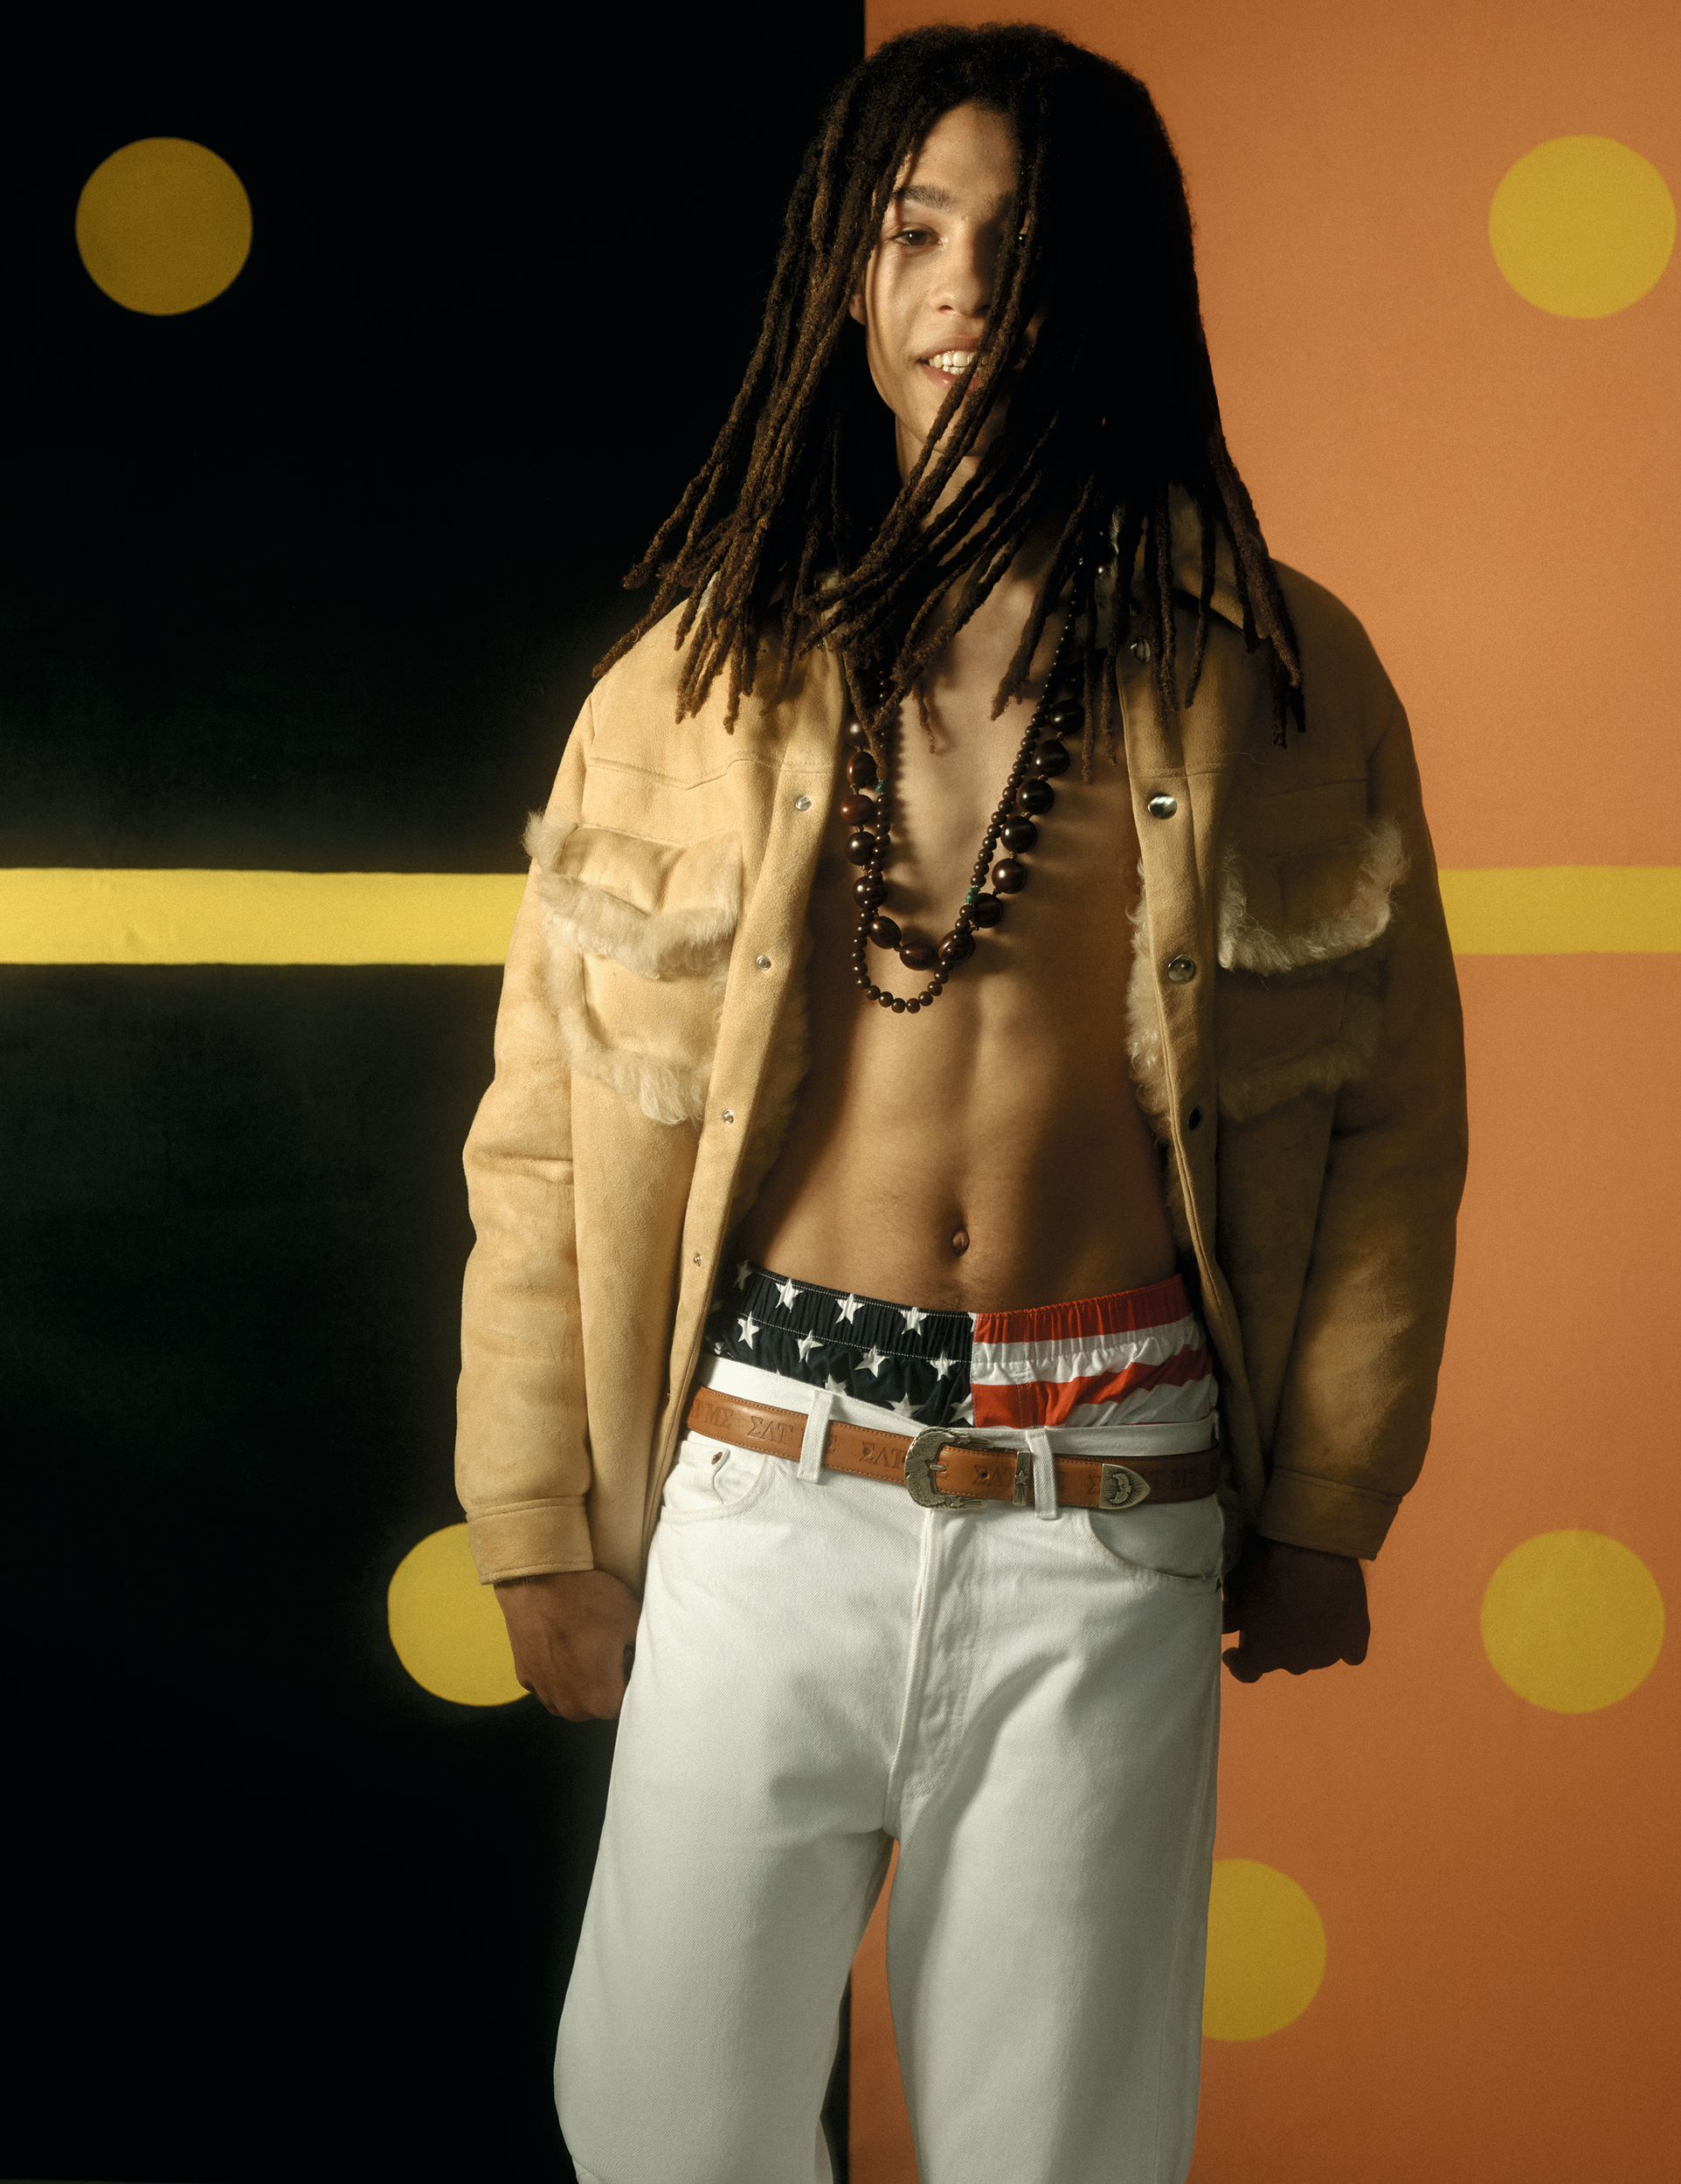 a model wearing white jeans with American flag boxers showing, with an open beige suede jacket and pearls 